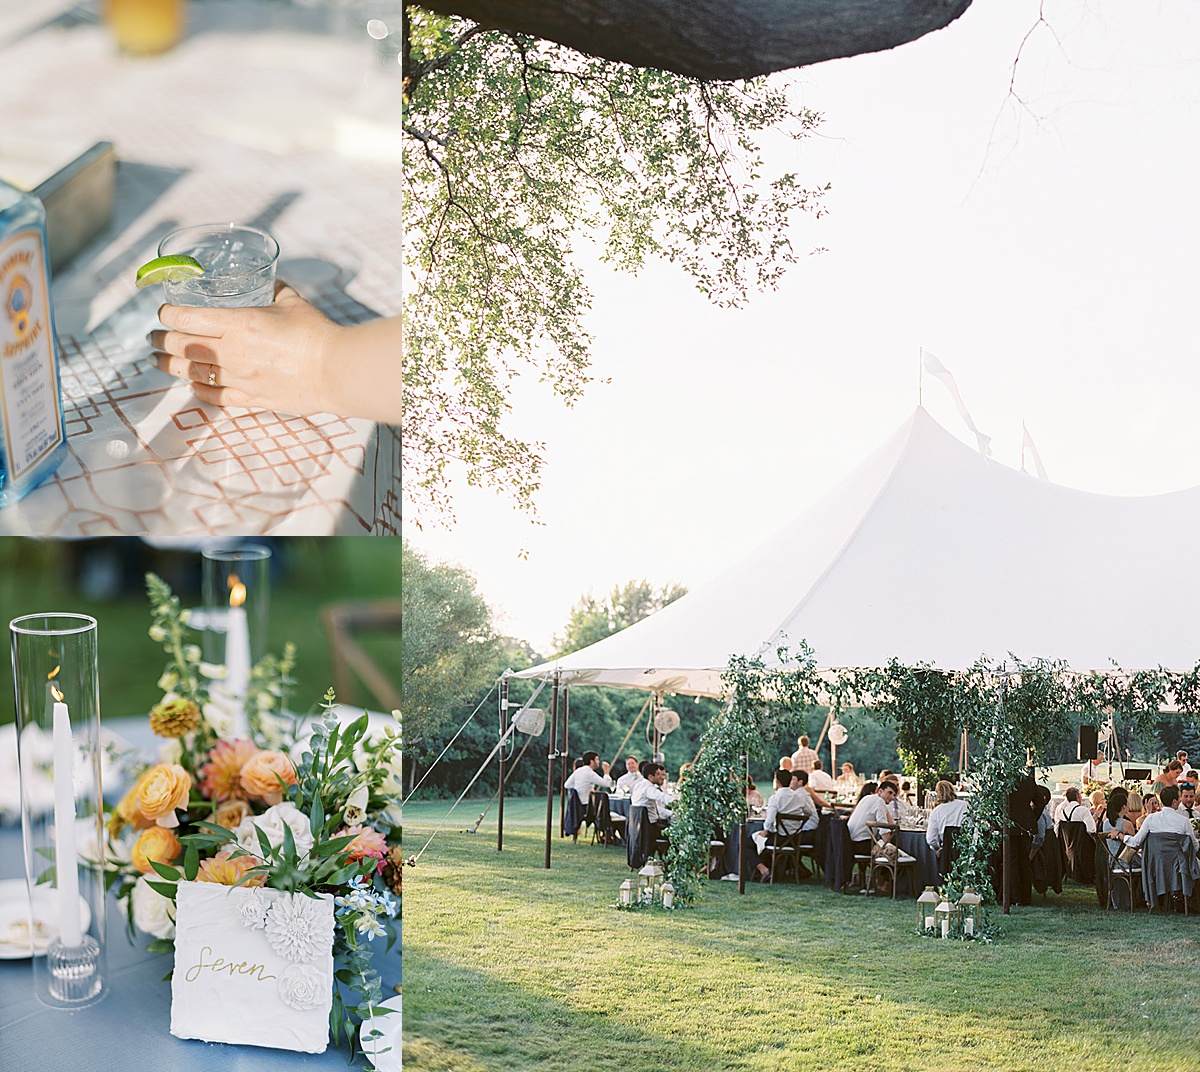 Wedding guests enjoy summertime cocktails under backyard tent at luxurious hometown celebration shot by sophie kaye photography